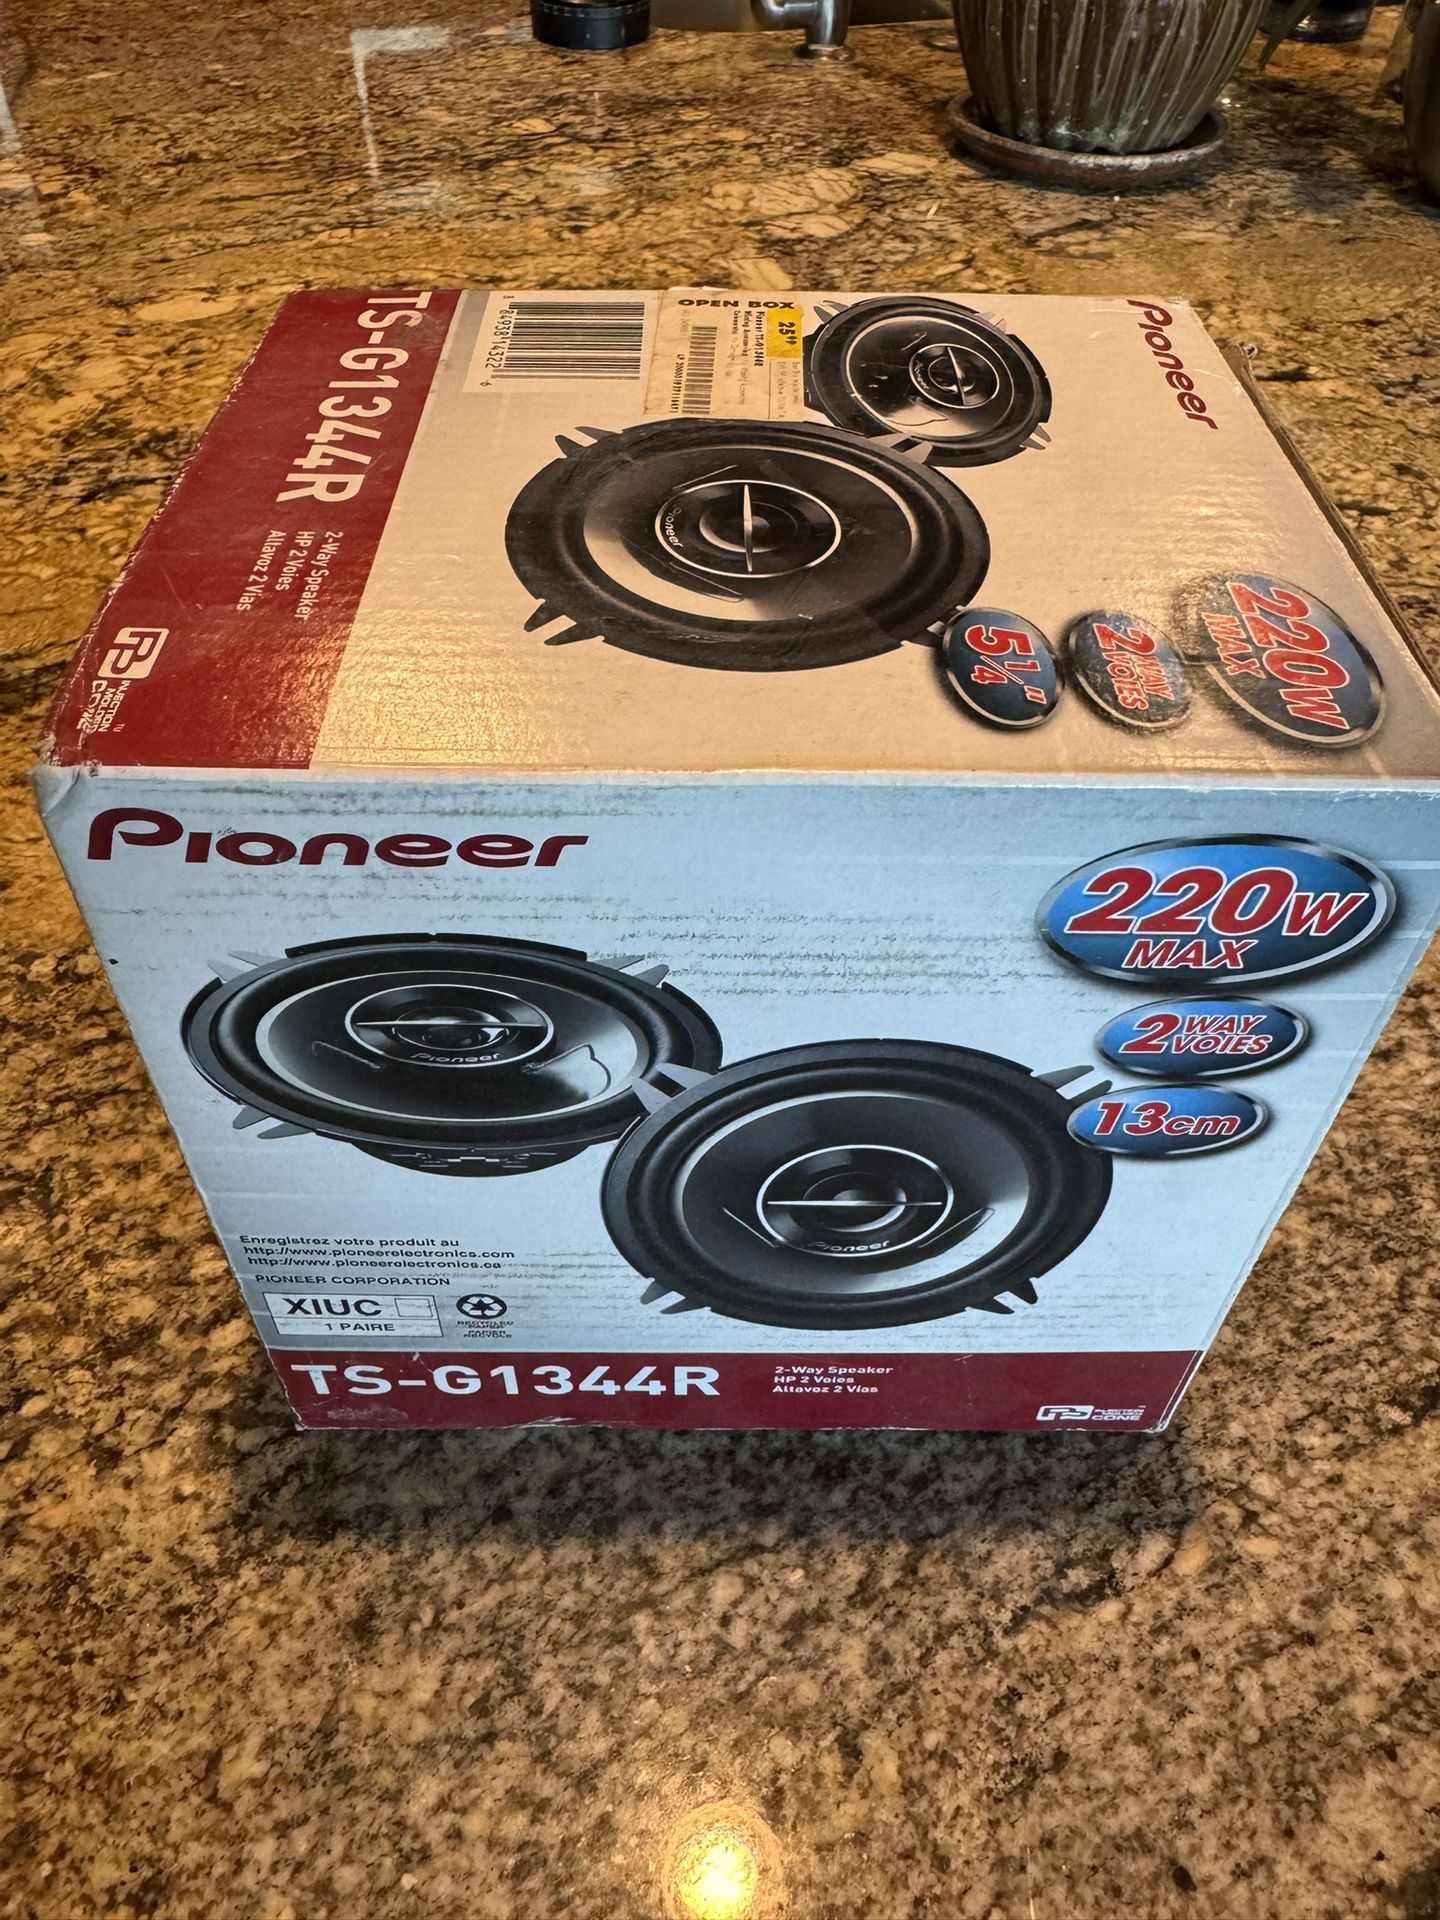 Pioneer TS-G1344R Coaxial 2 Way Car Speakers New In Box